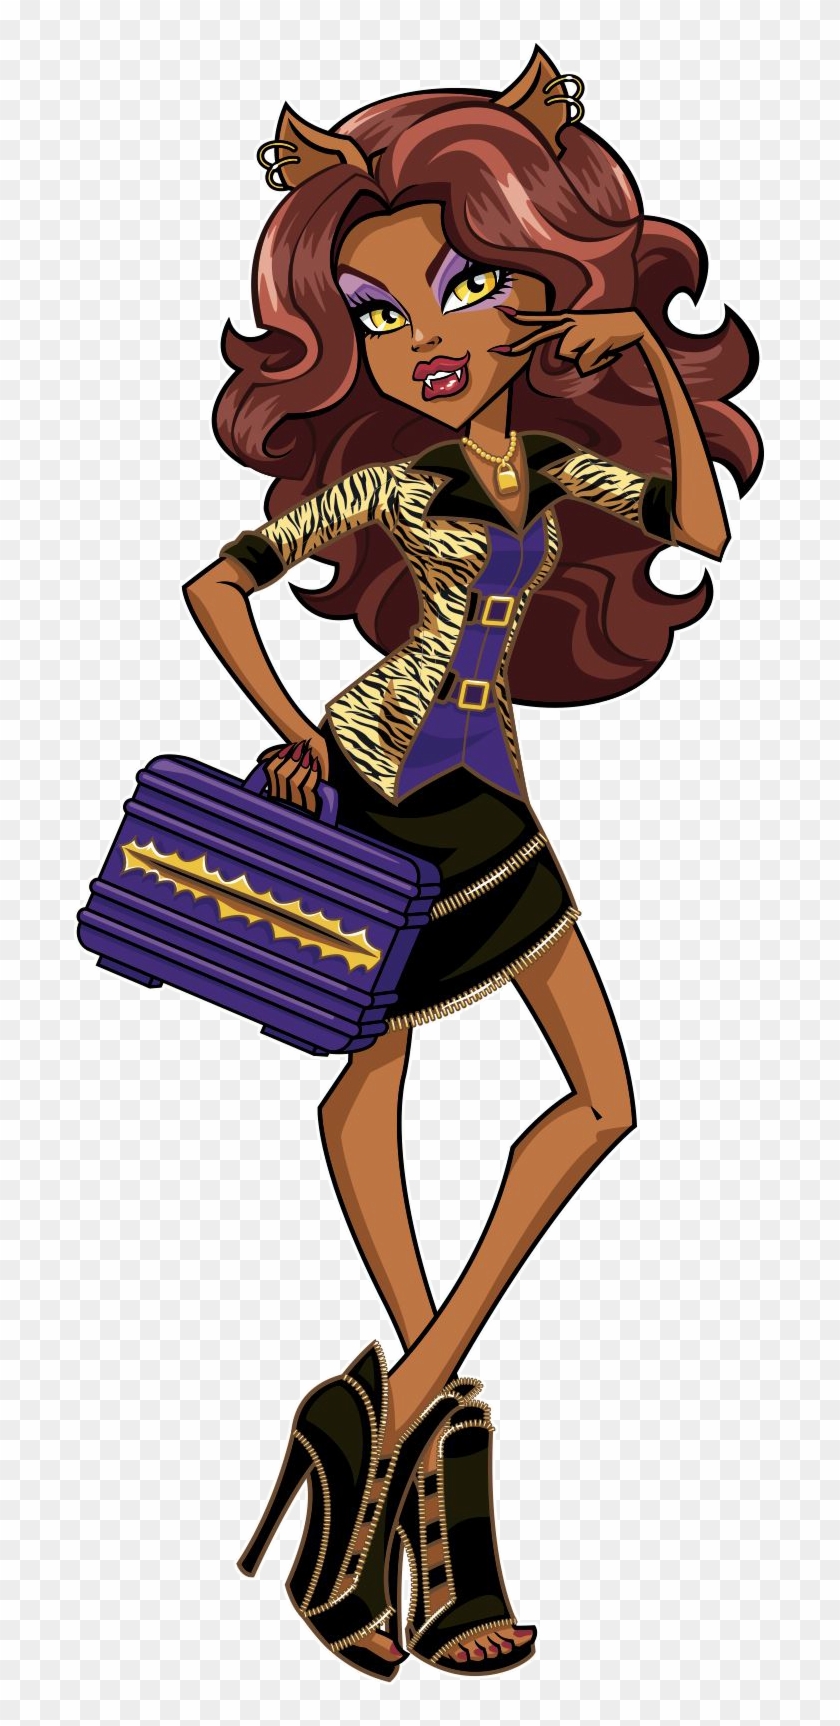 Confident And Fierce, She Is Considered The School's - Werewolf Girl From Monster High #1126231